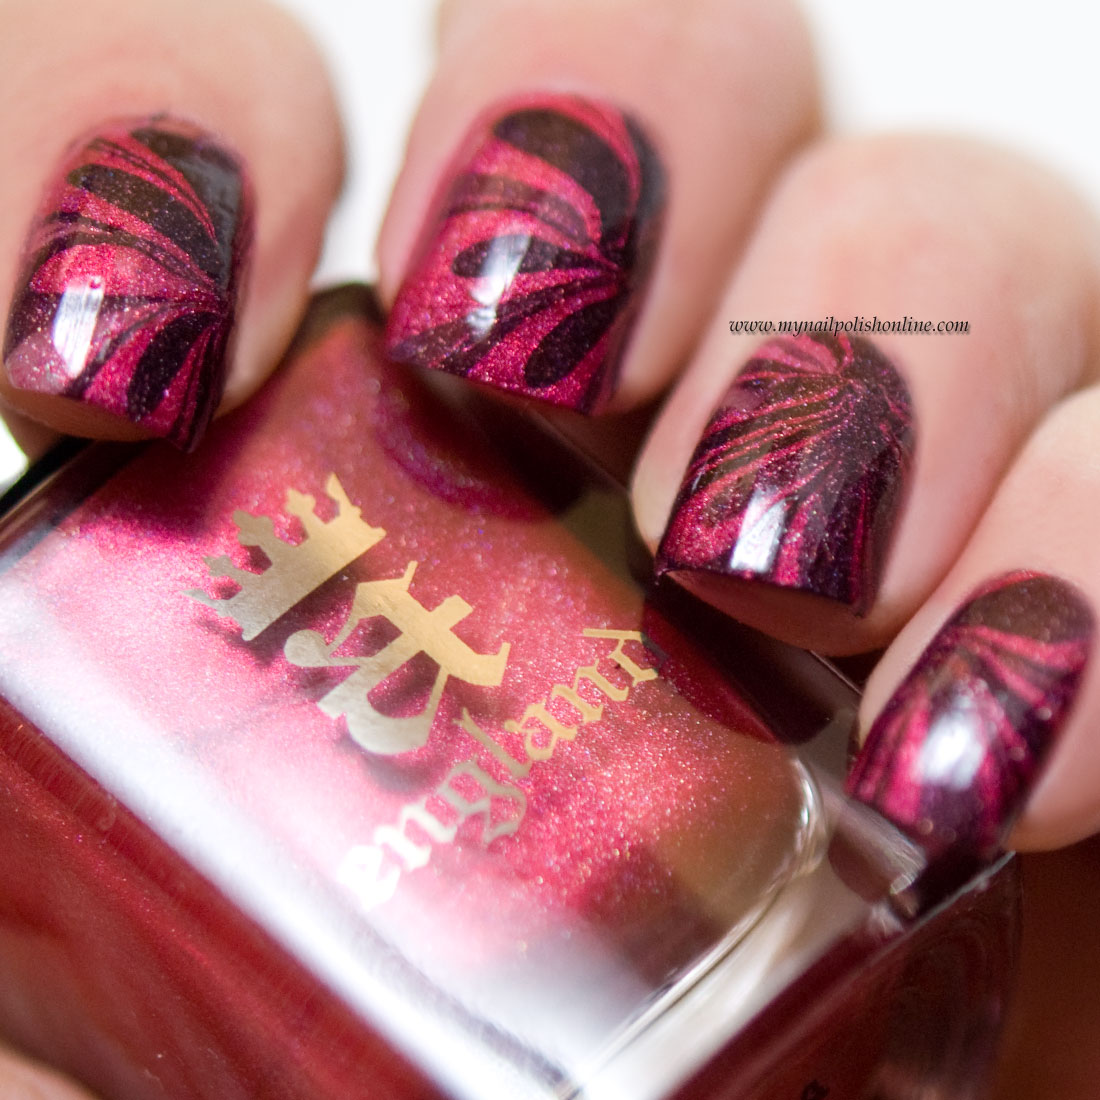 Nail Art Sunday - Water marbling with A England